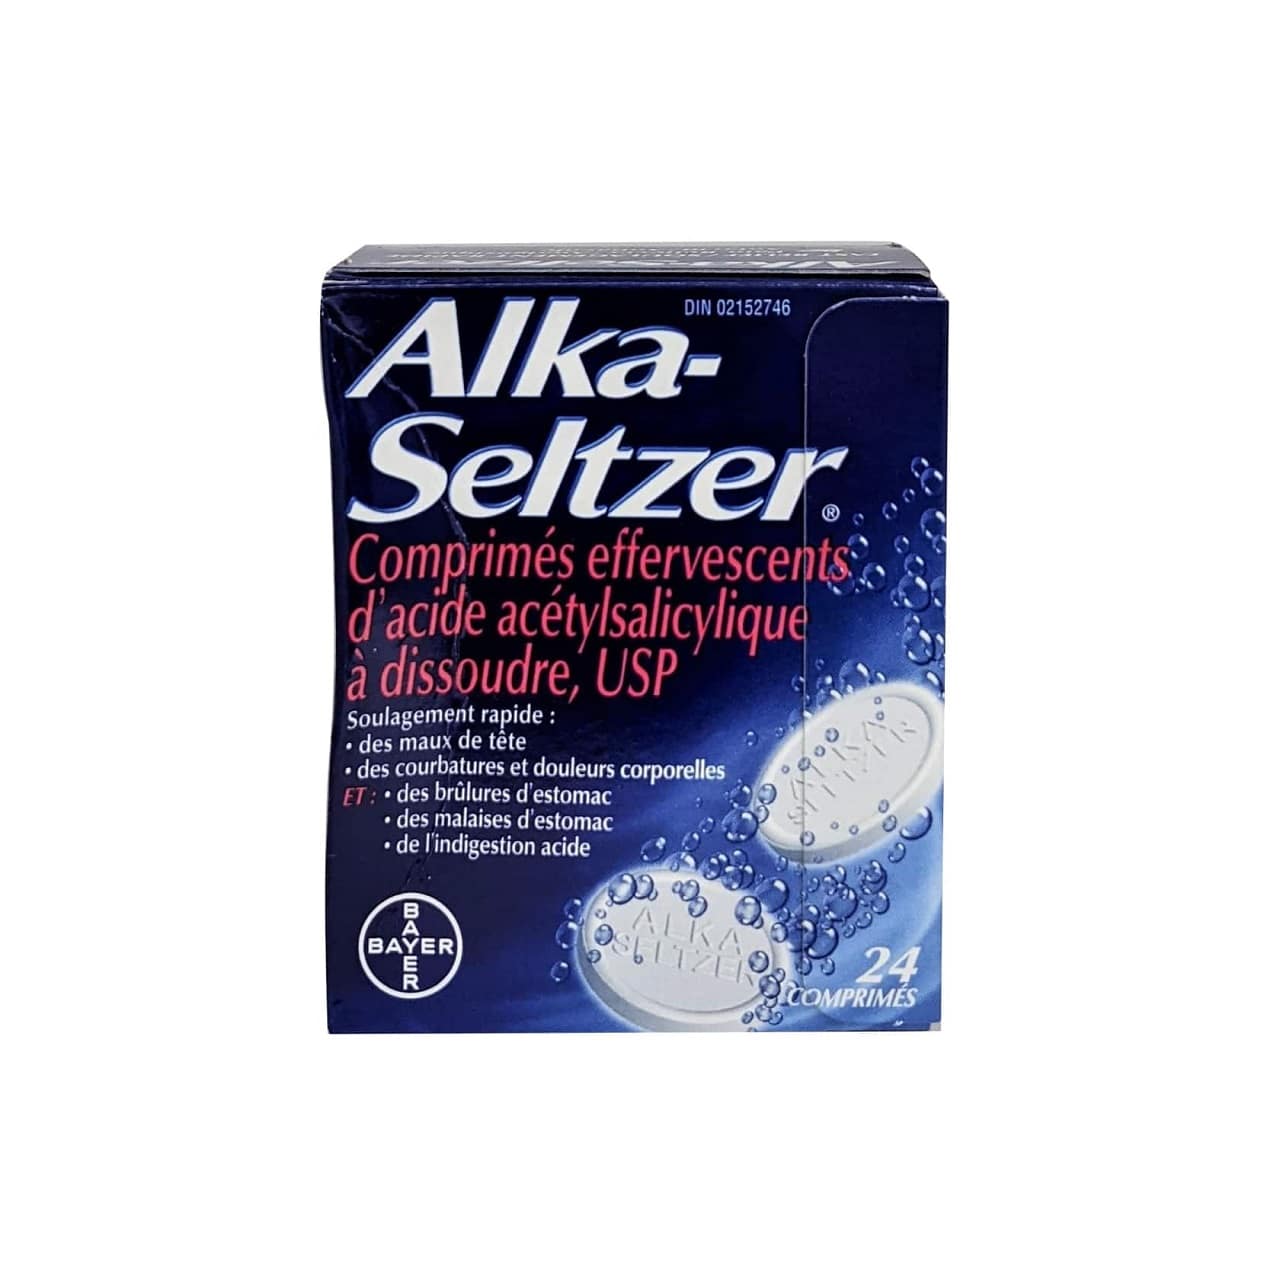 French product label for Alka-Seltzer Acetylsalicylic Acid Effervescent Tablets